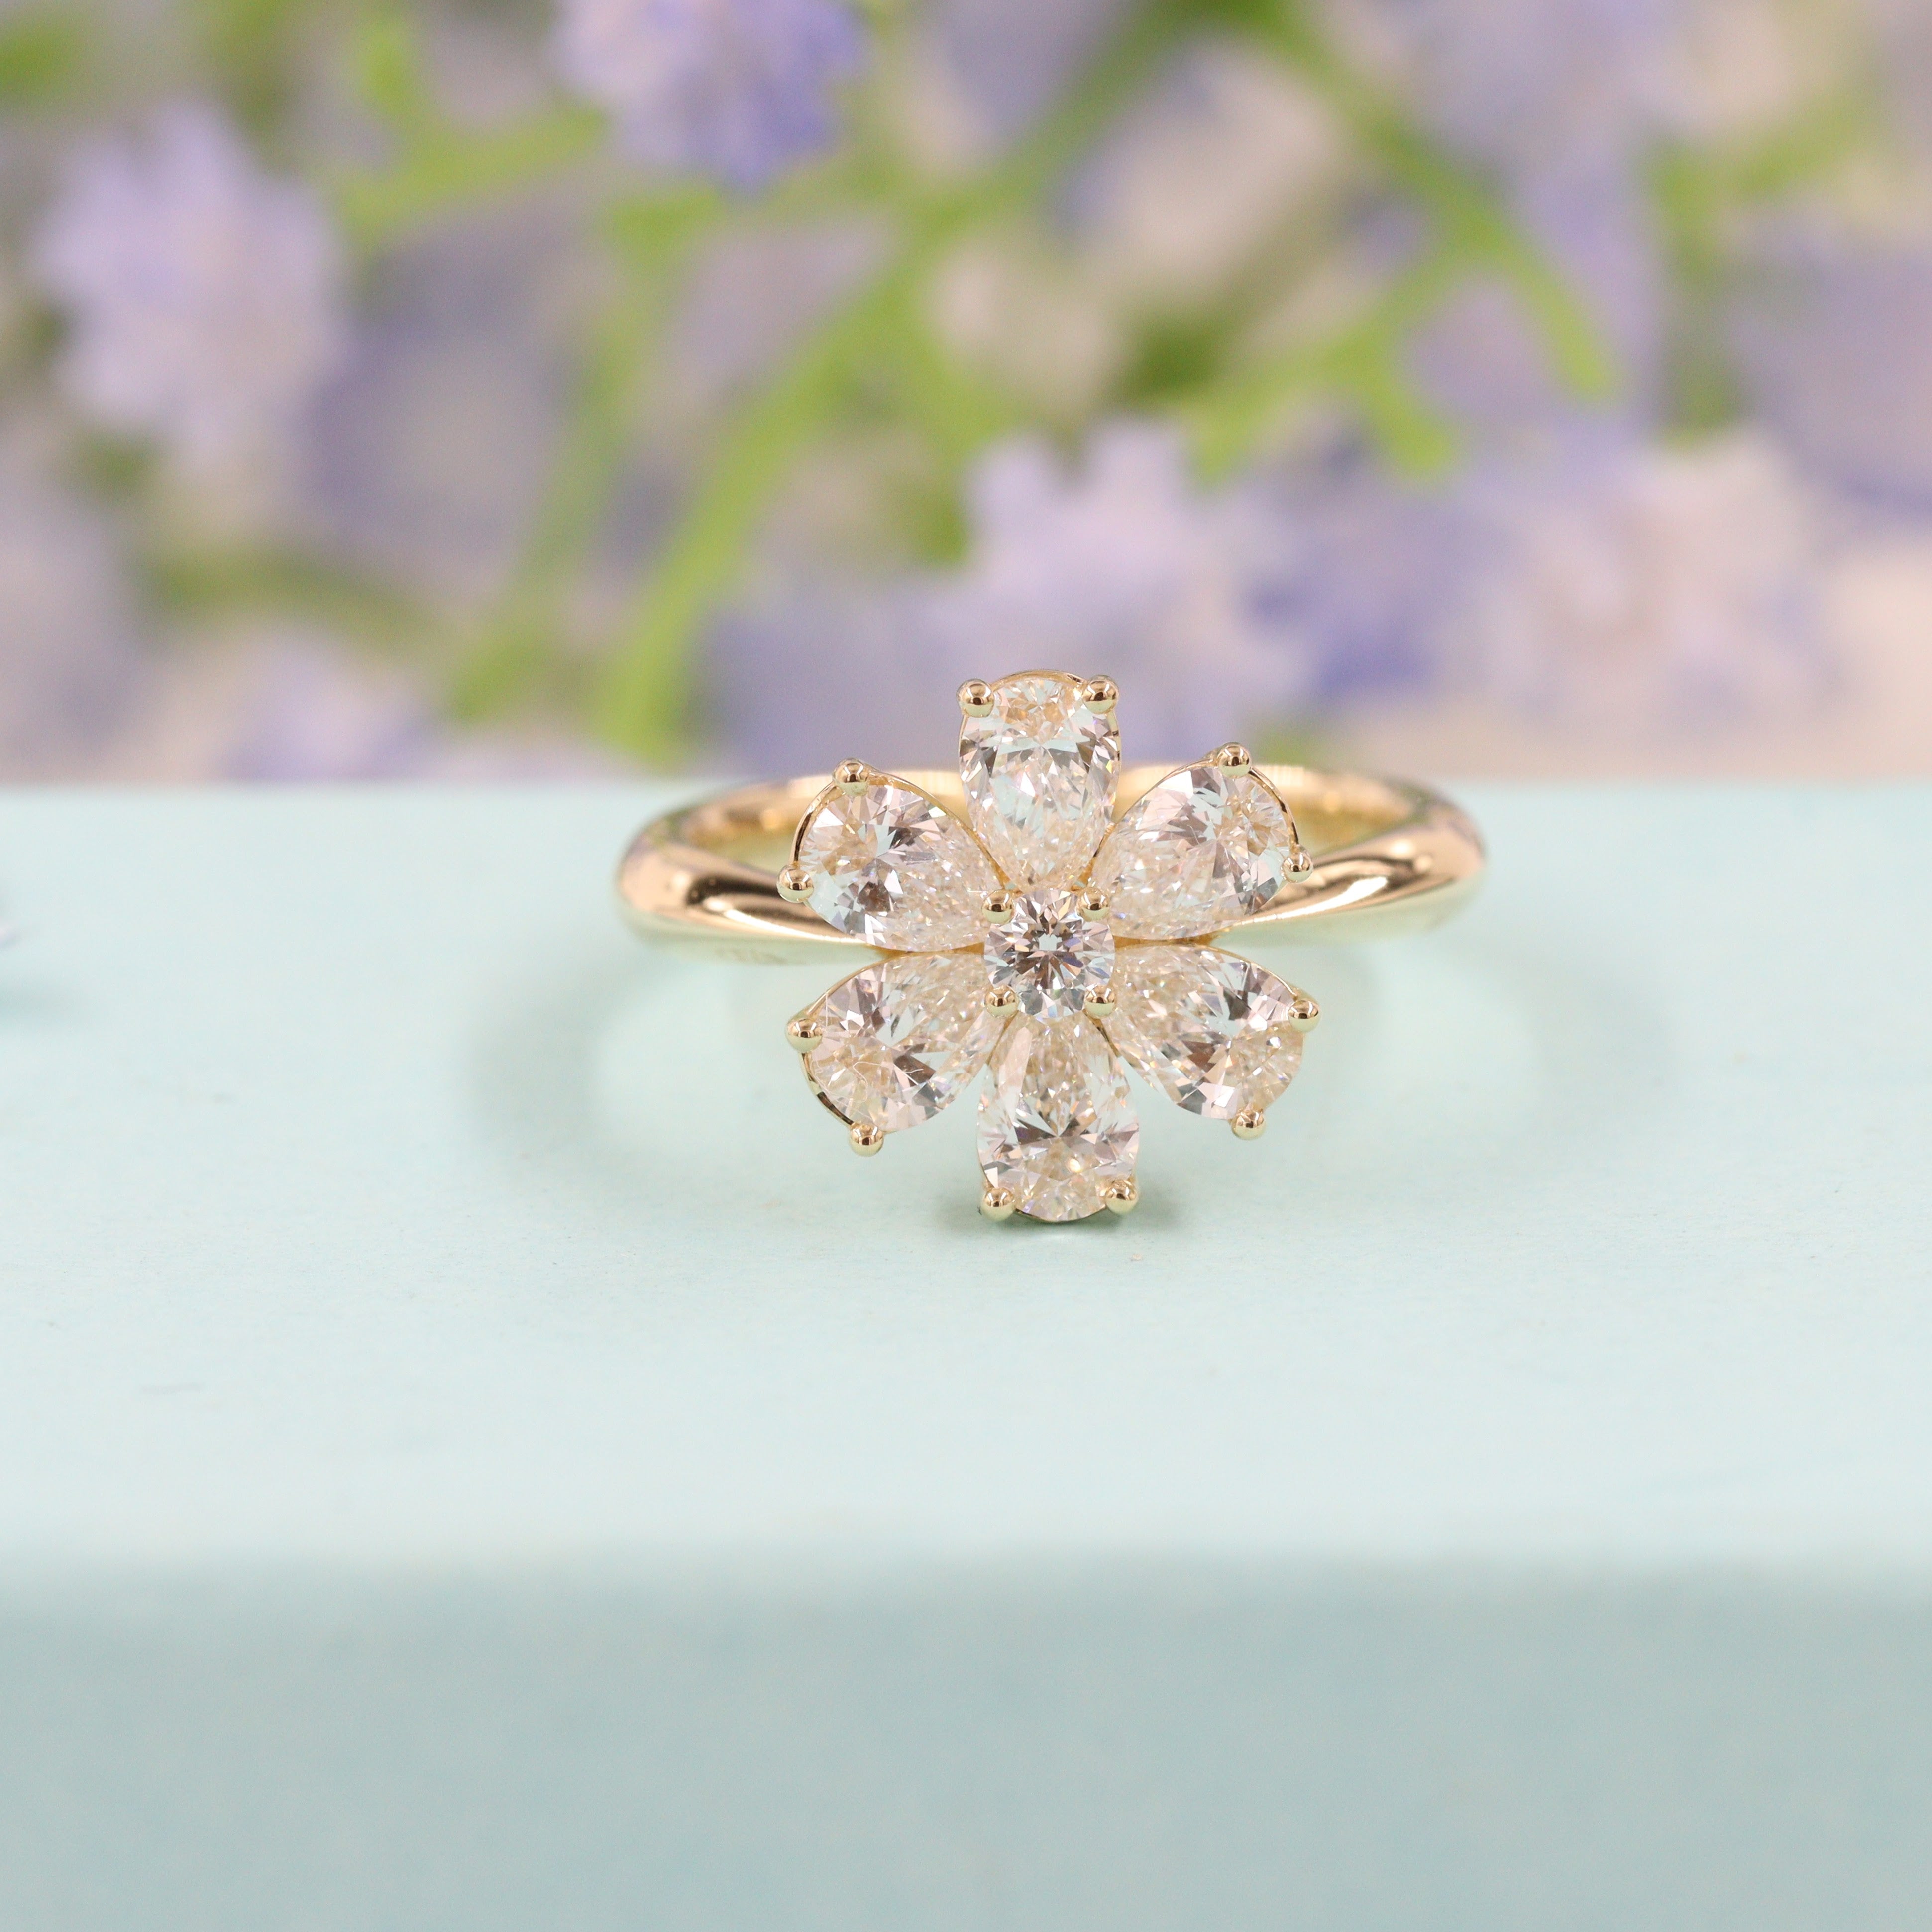 14K White Gold Baguette and Round Diamond Flower Ring-81188w14